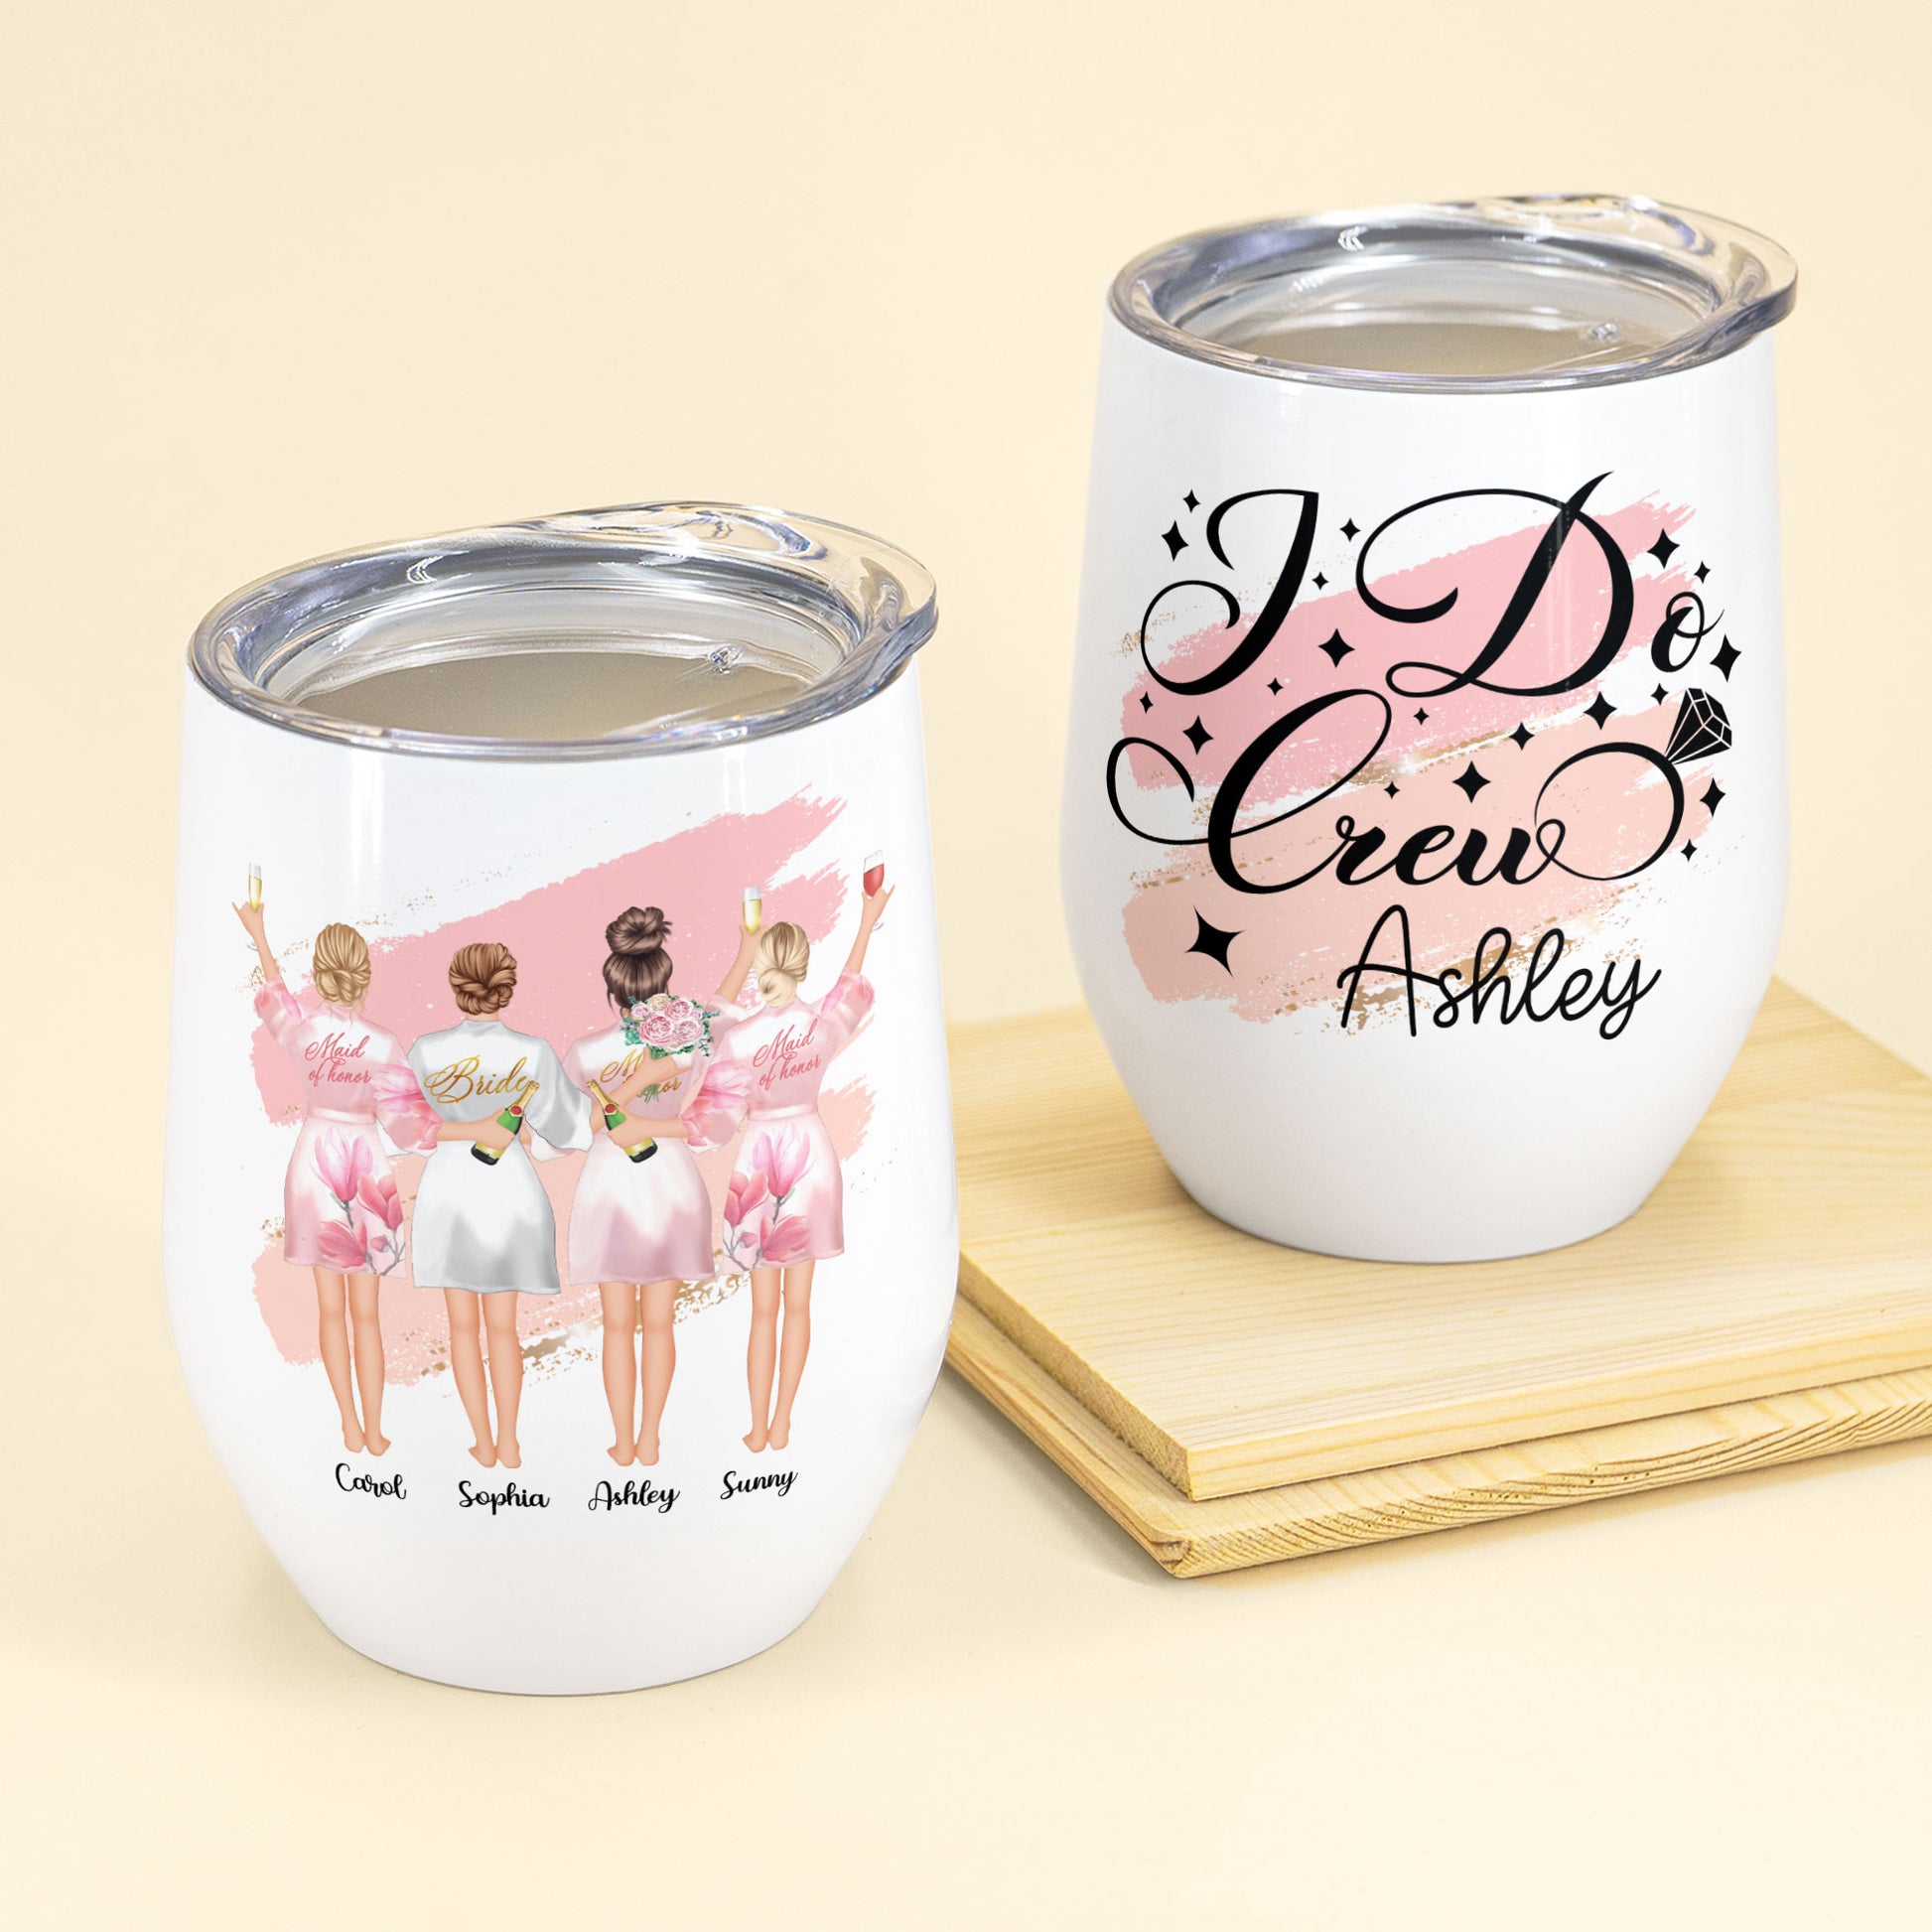 Buy Engraved Because Clients - Engraved Funny and Cute 12oz